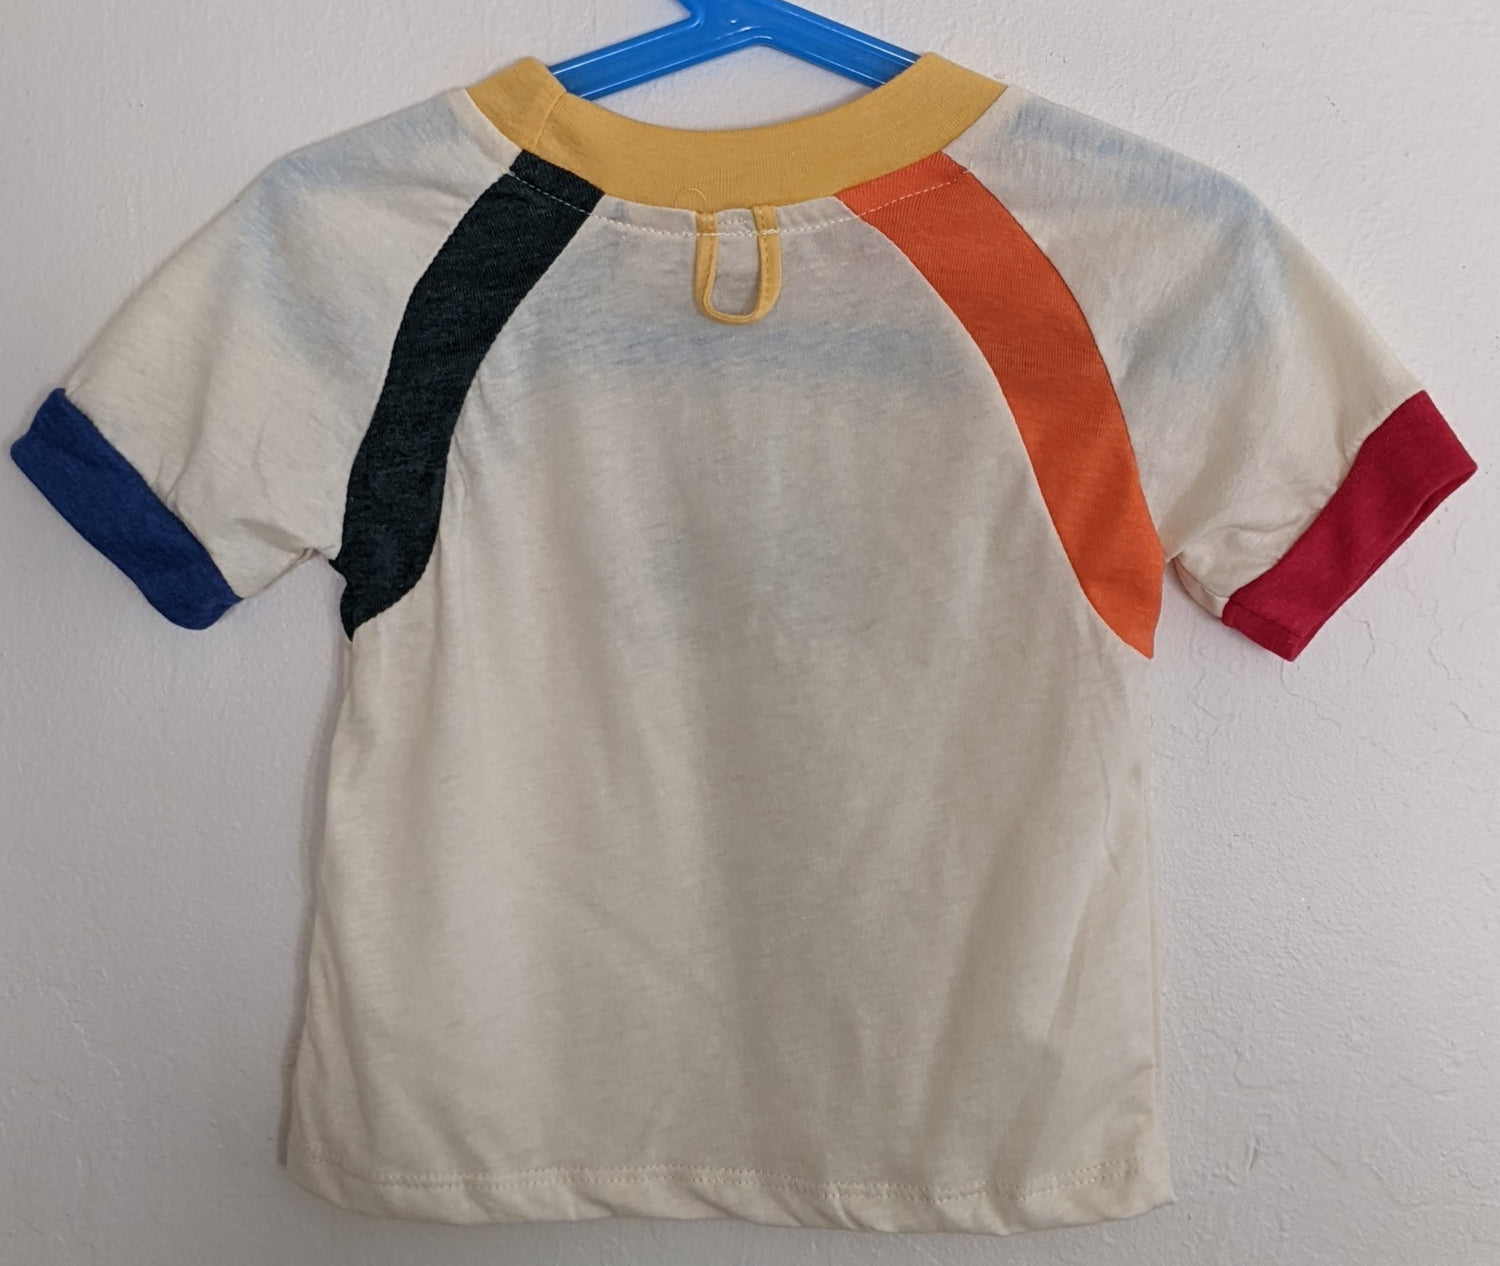 White kids shirt by Camp Collection with rainbow accents with blank back,  created by Jackie from Present